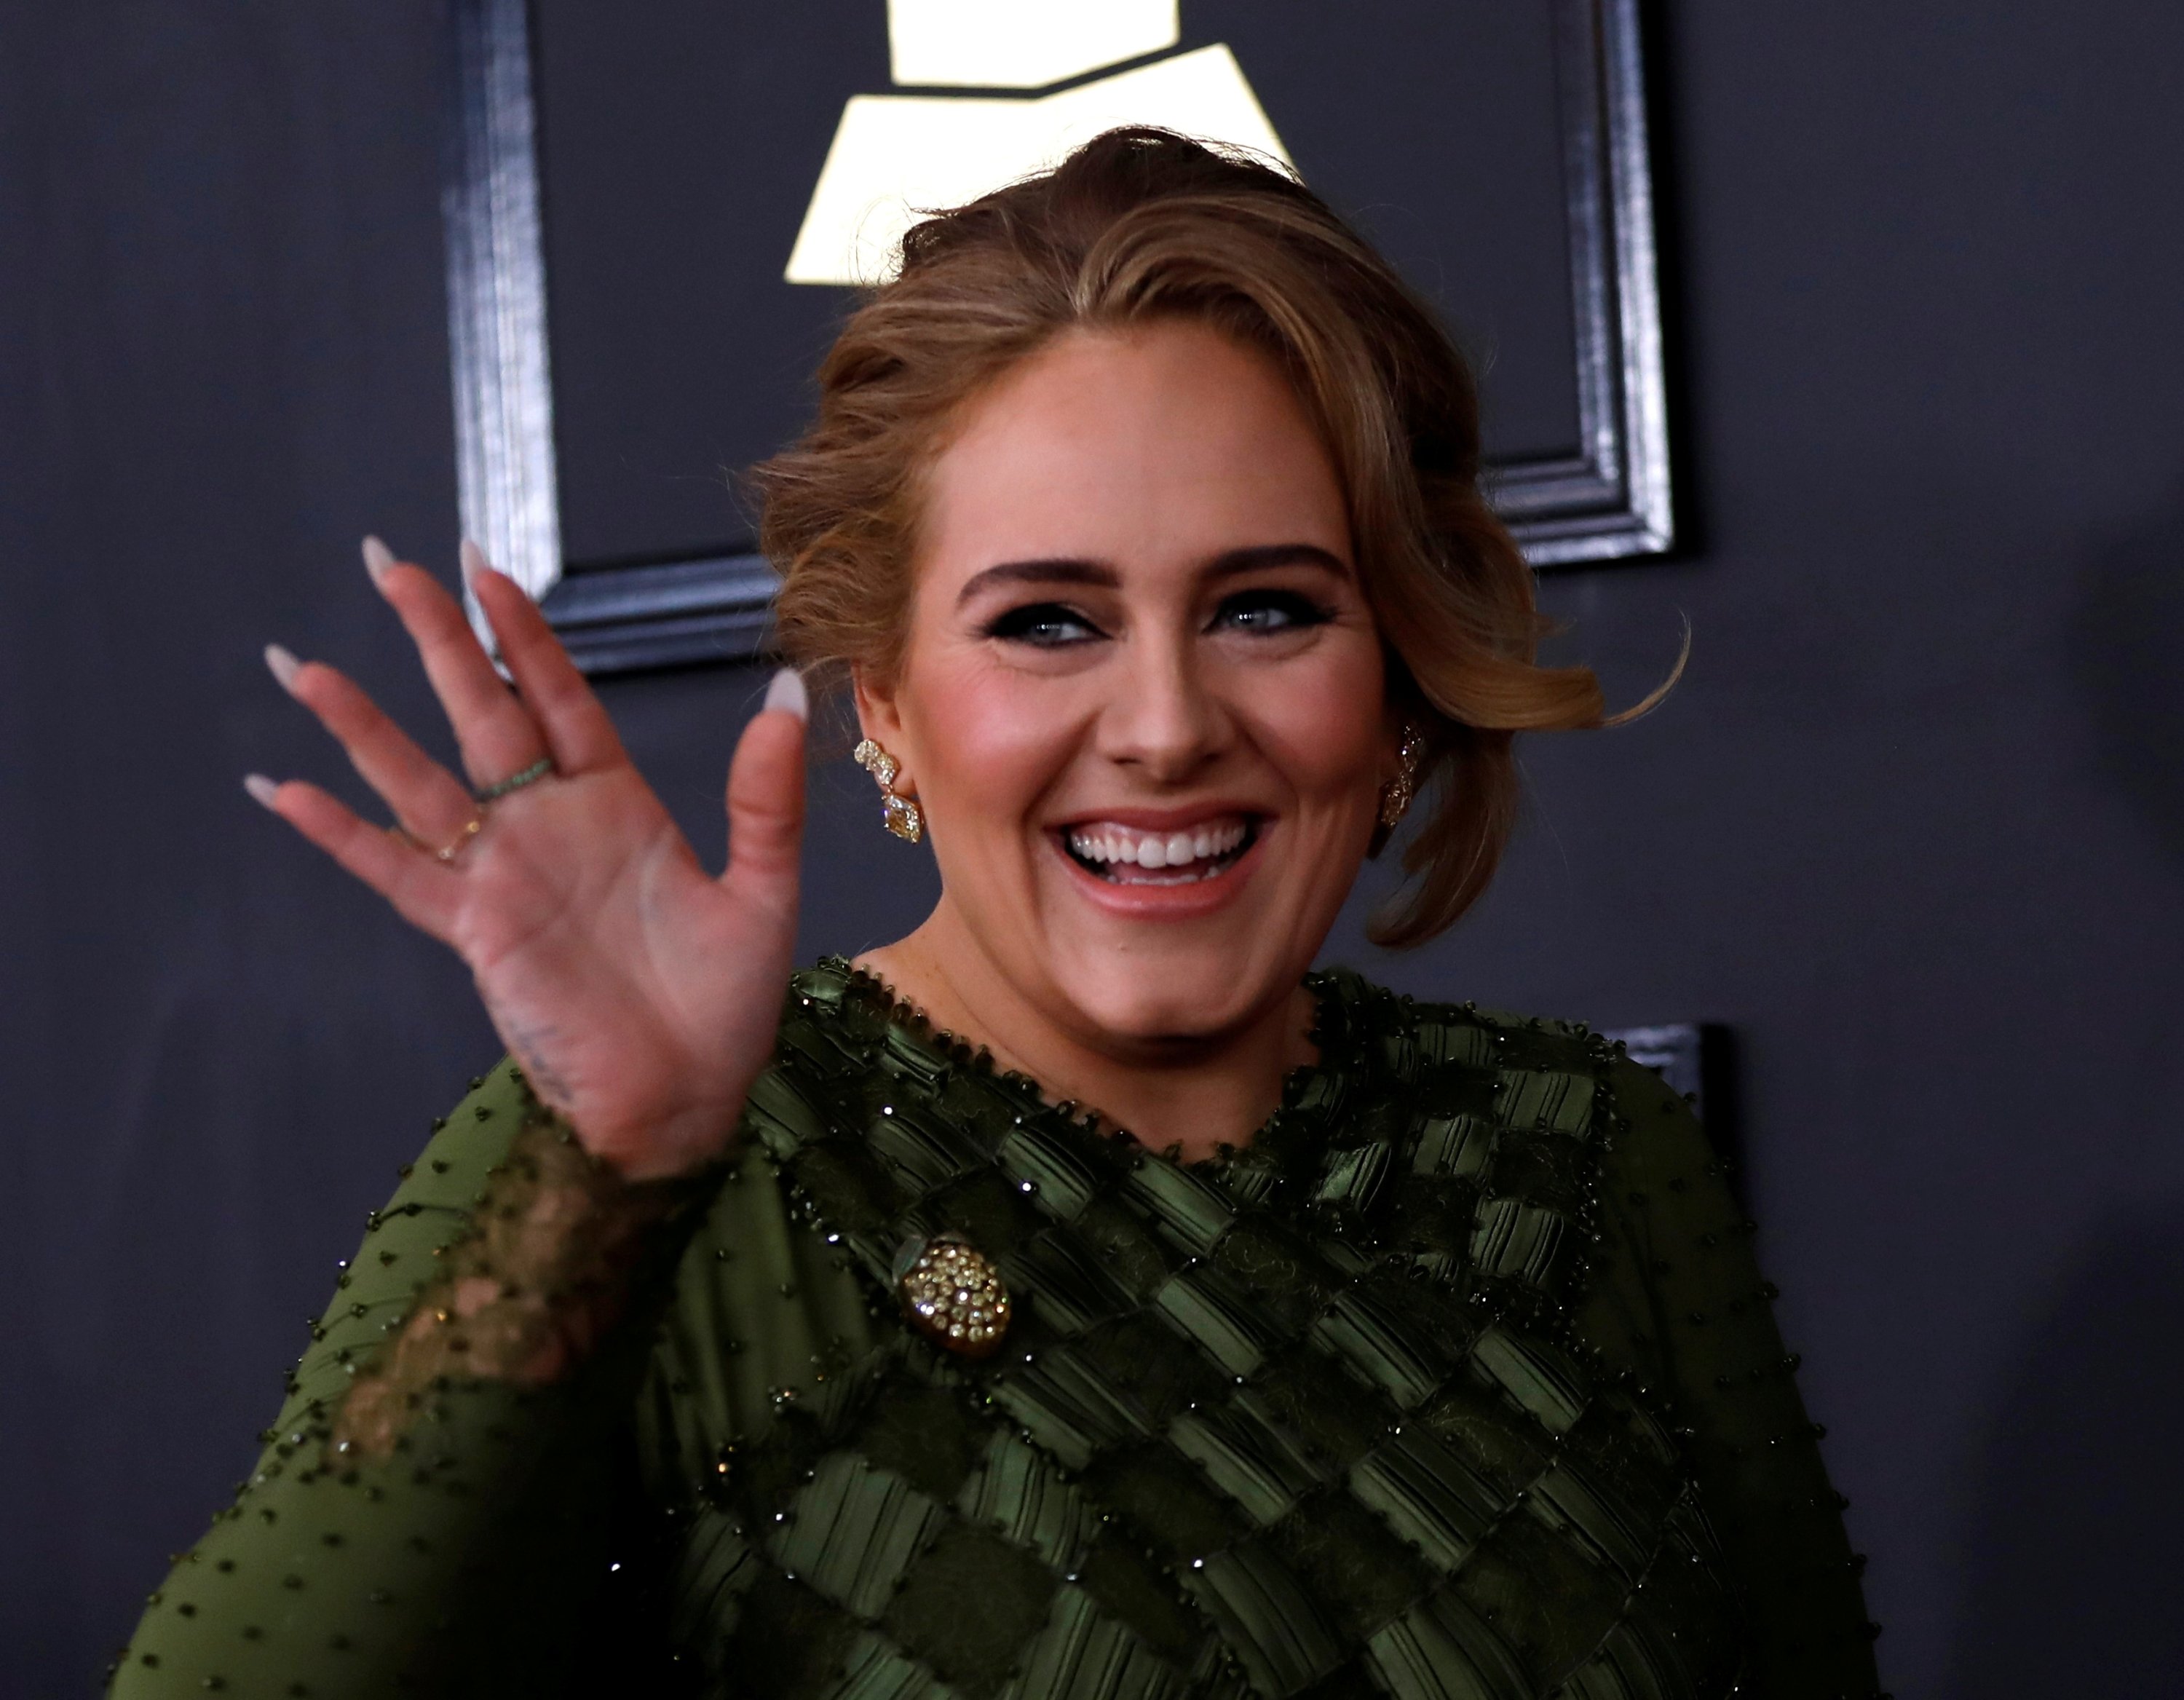 Singer Adele arrives at the 59th Annual Grammy Awards in Los Angeles, California, U.S., Feb. 12, 2017. (REUTERS)